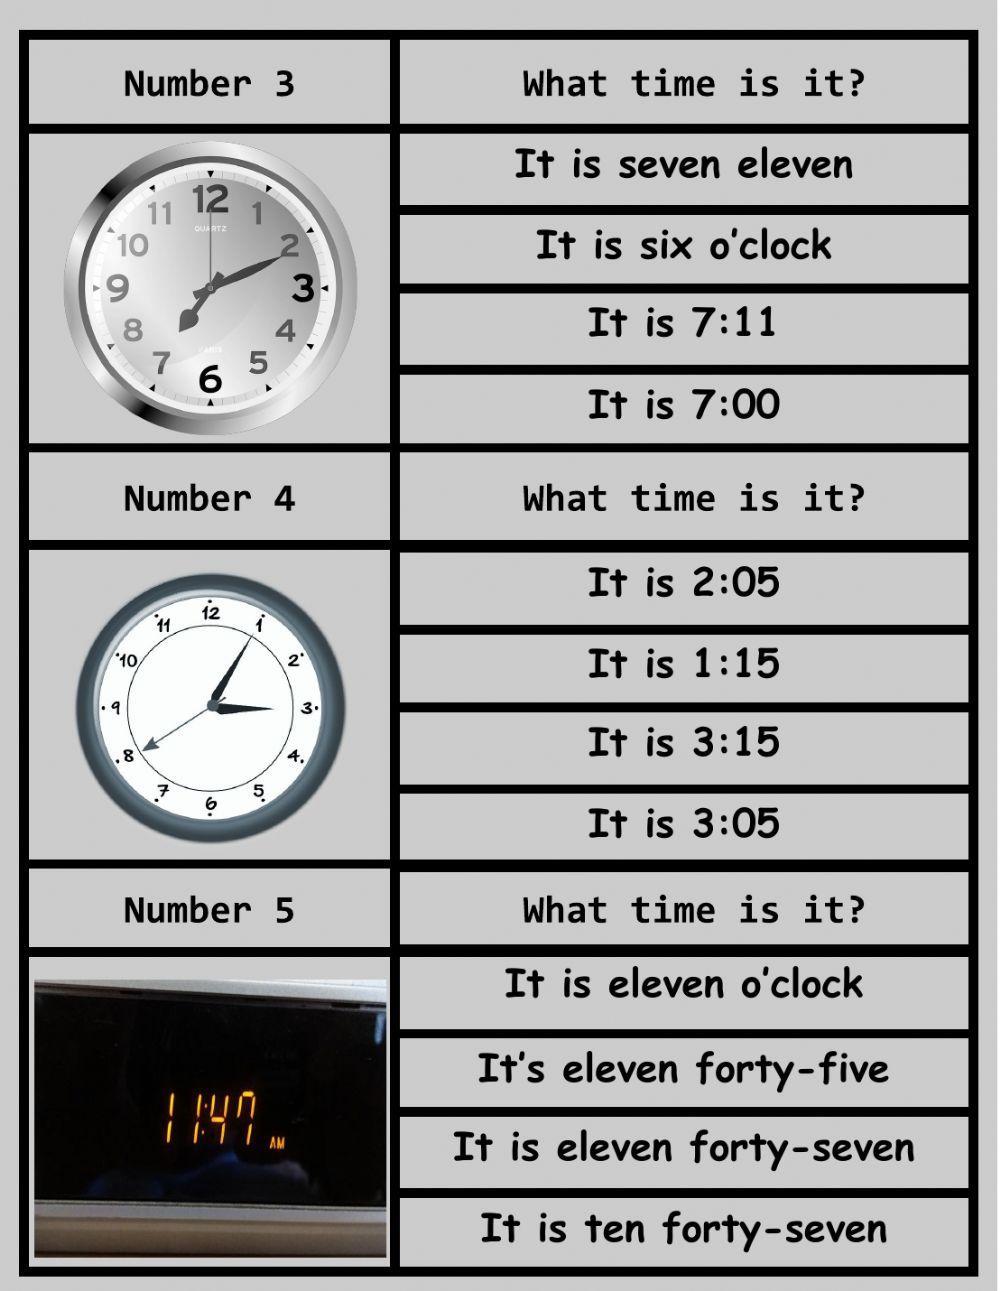 What time is it? Part 2